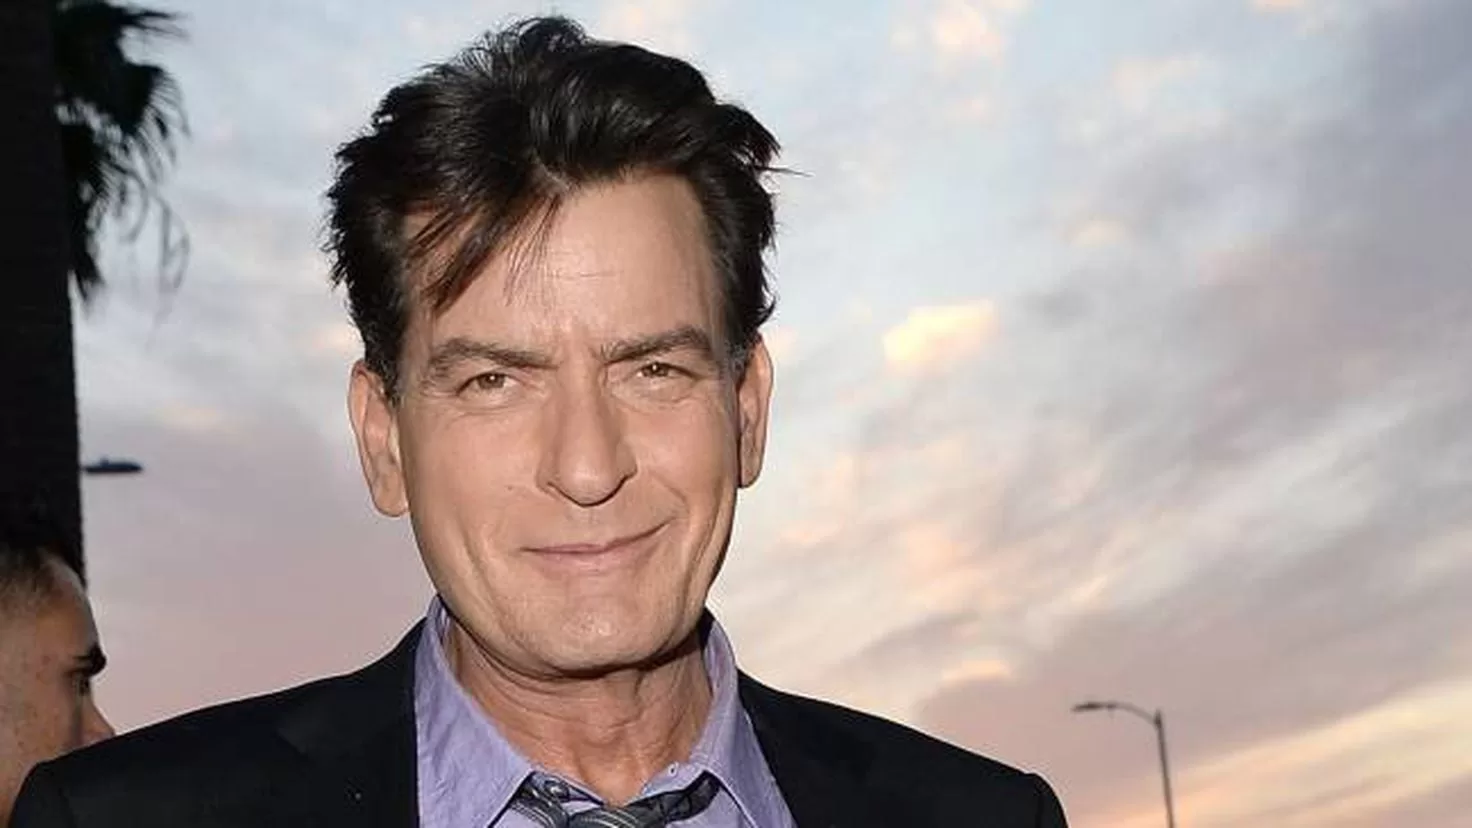 They arrest a neighbor of Charlie Sheen after breaking into his house and trying to strangle him
